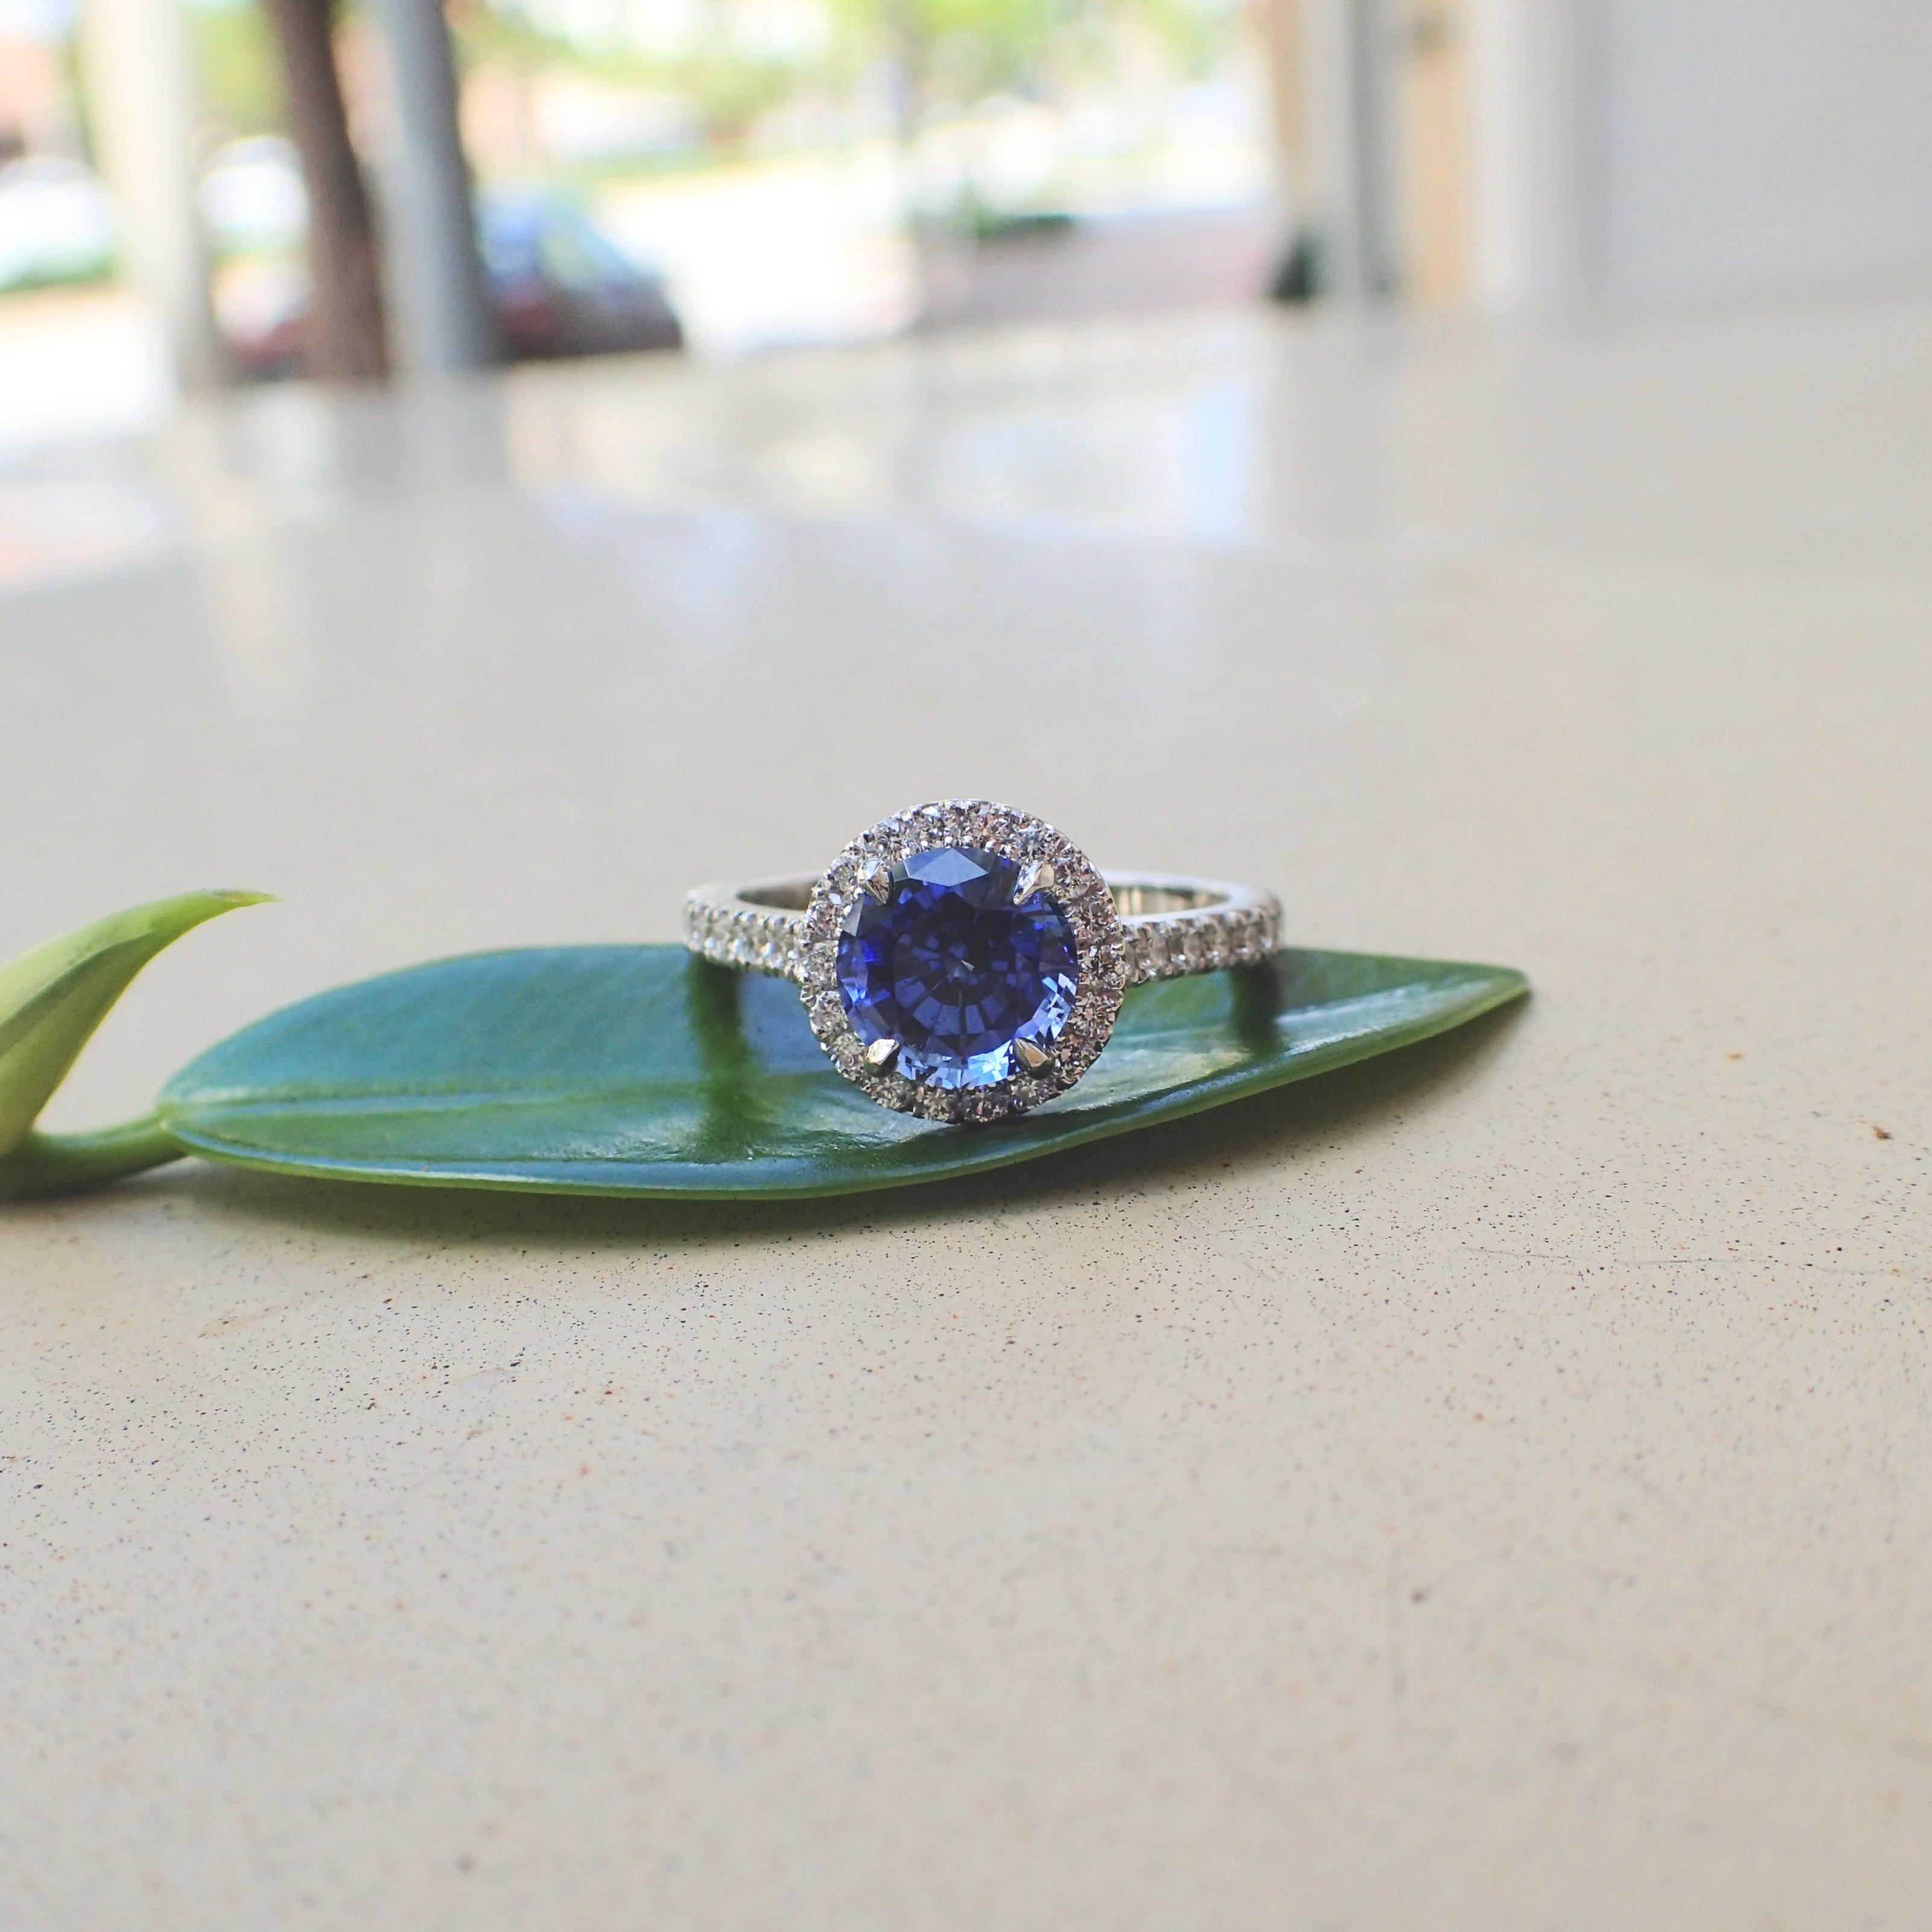 An 18k white gold ring is set with one (1) Round Brilliant Cut Chatham-Created Sapphire that measures 7mm x 7mm and weighs 1.85 carats with Clarity Grade VS-VVS and (18) Round Brilliant Cut Diamonds that measure 1.5mm x 1.5mm and weigh a total of